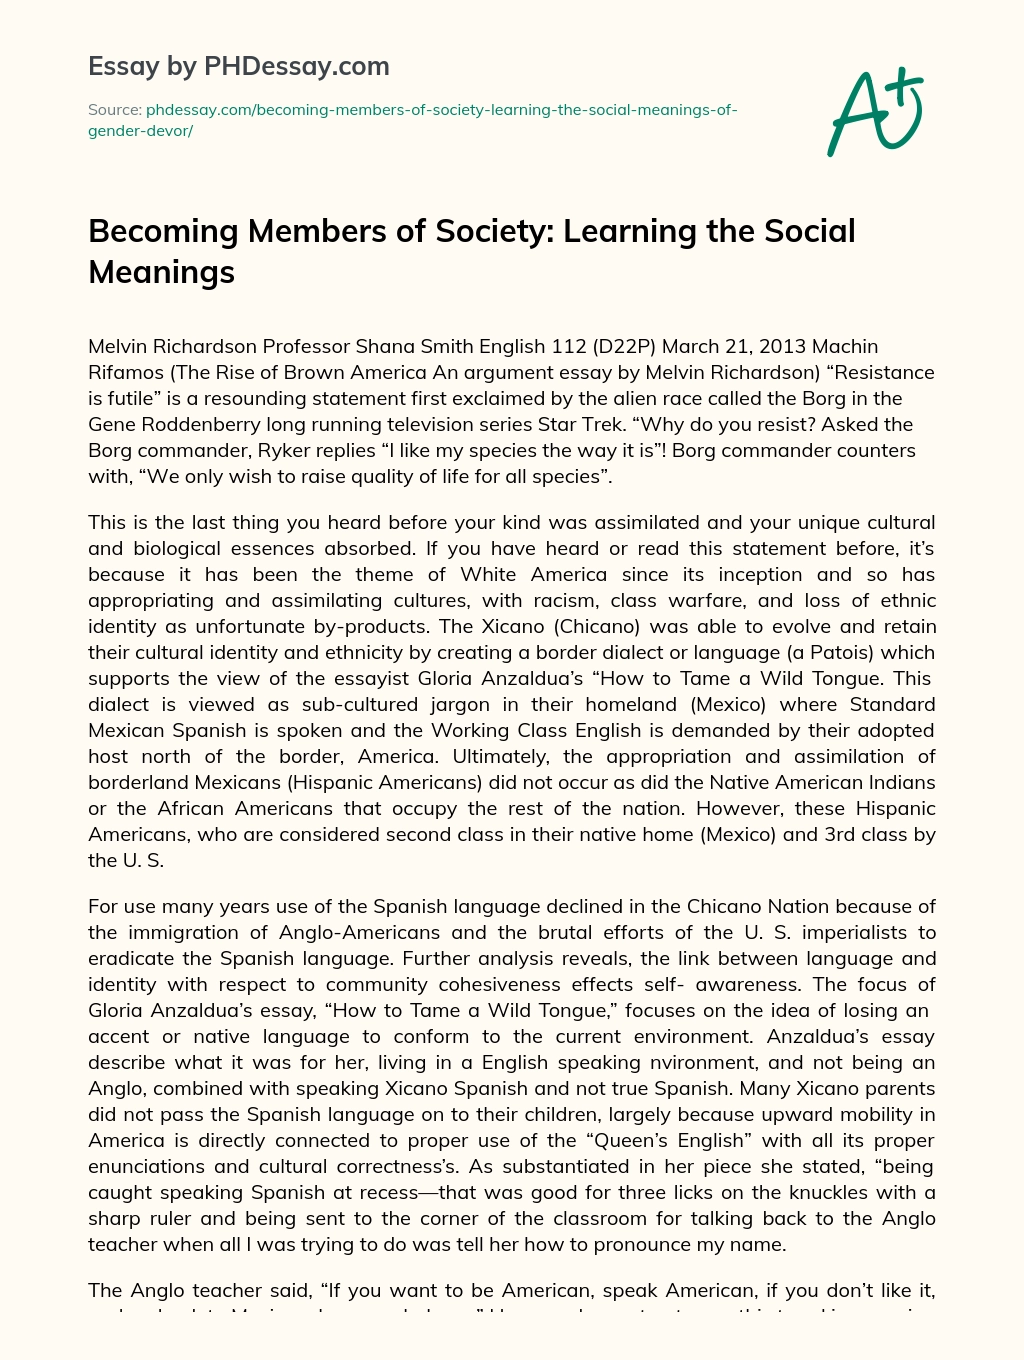 Becoming Members of Society: Learning the Social Meanings essay